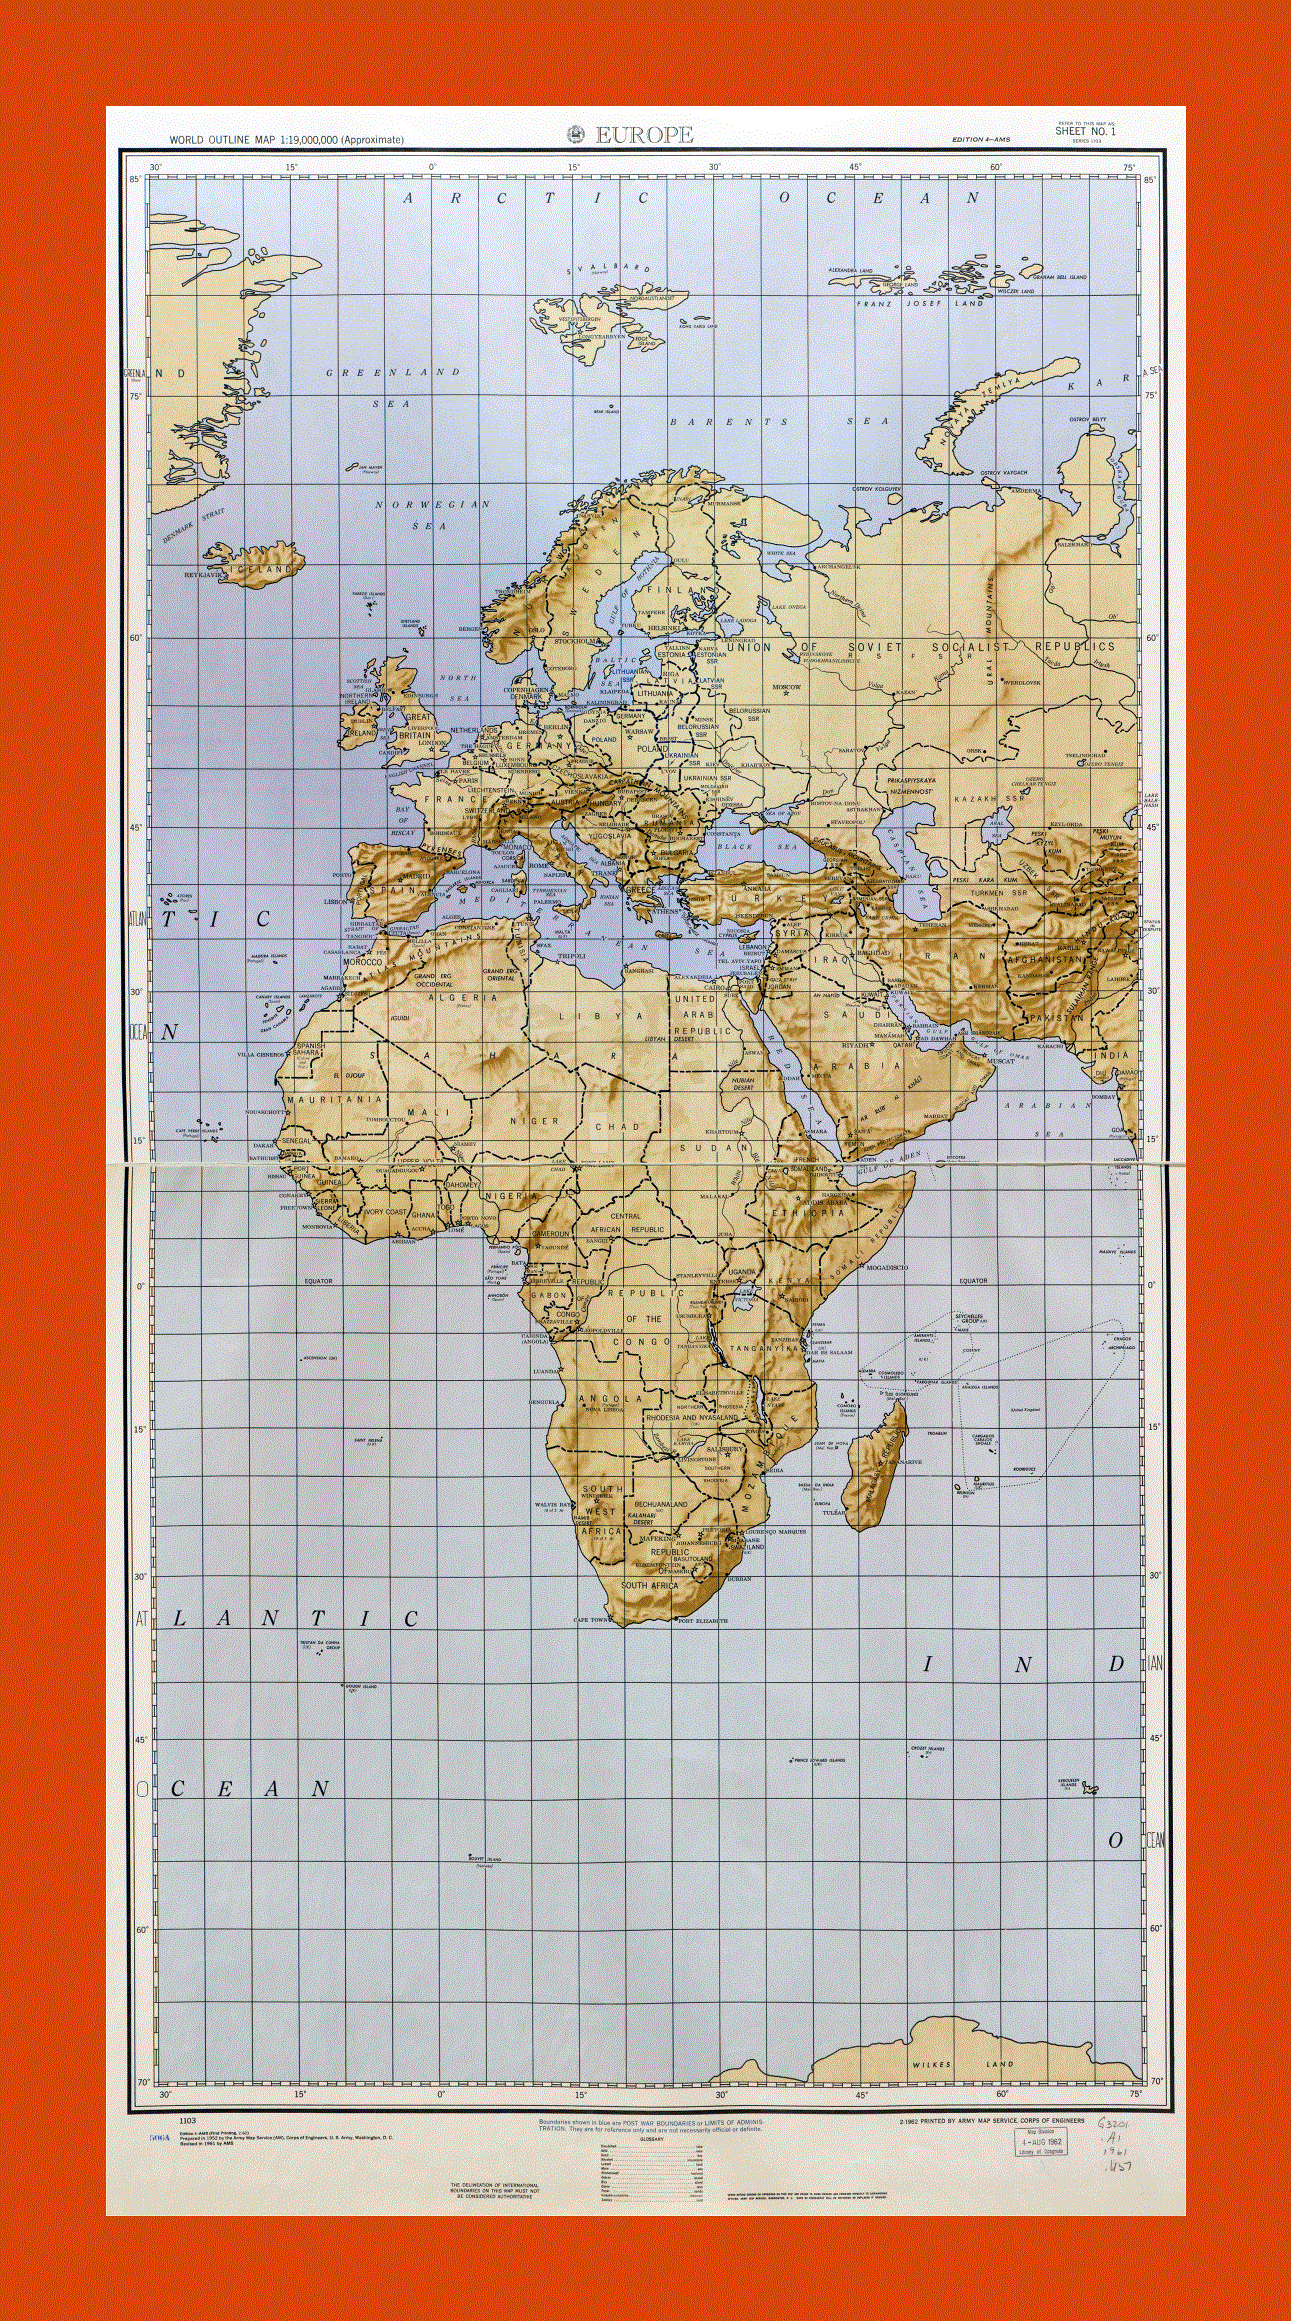 World outline map - part 2 (Europe) 1961-62